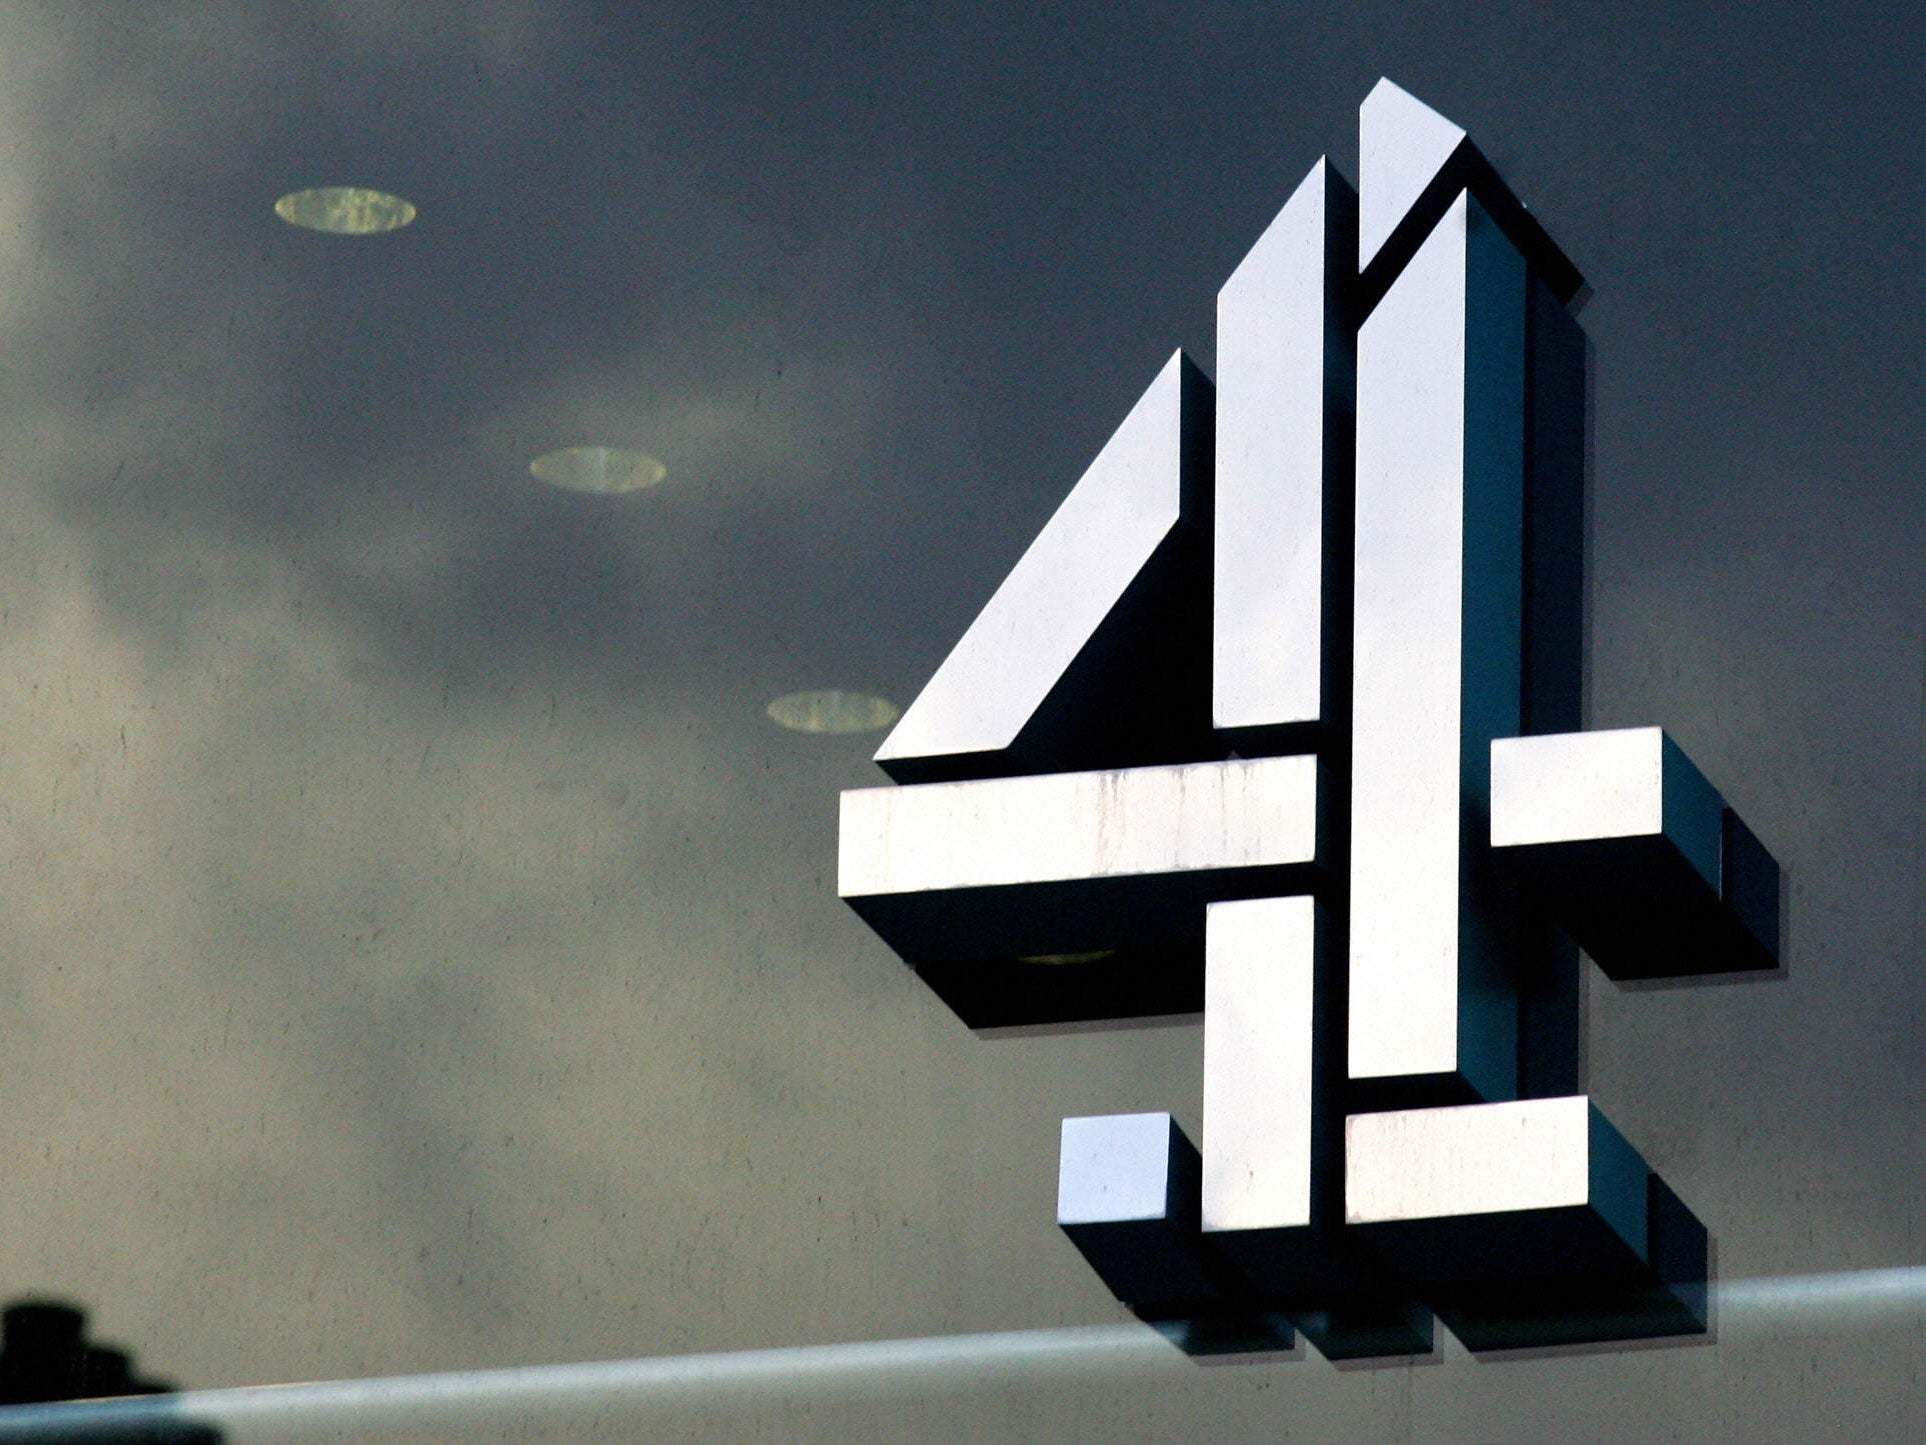 Channel 4 has been accused of exploiting the "most deprived"